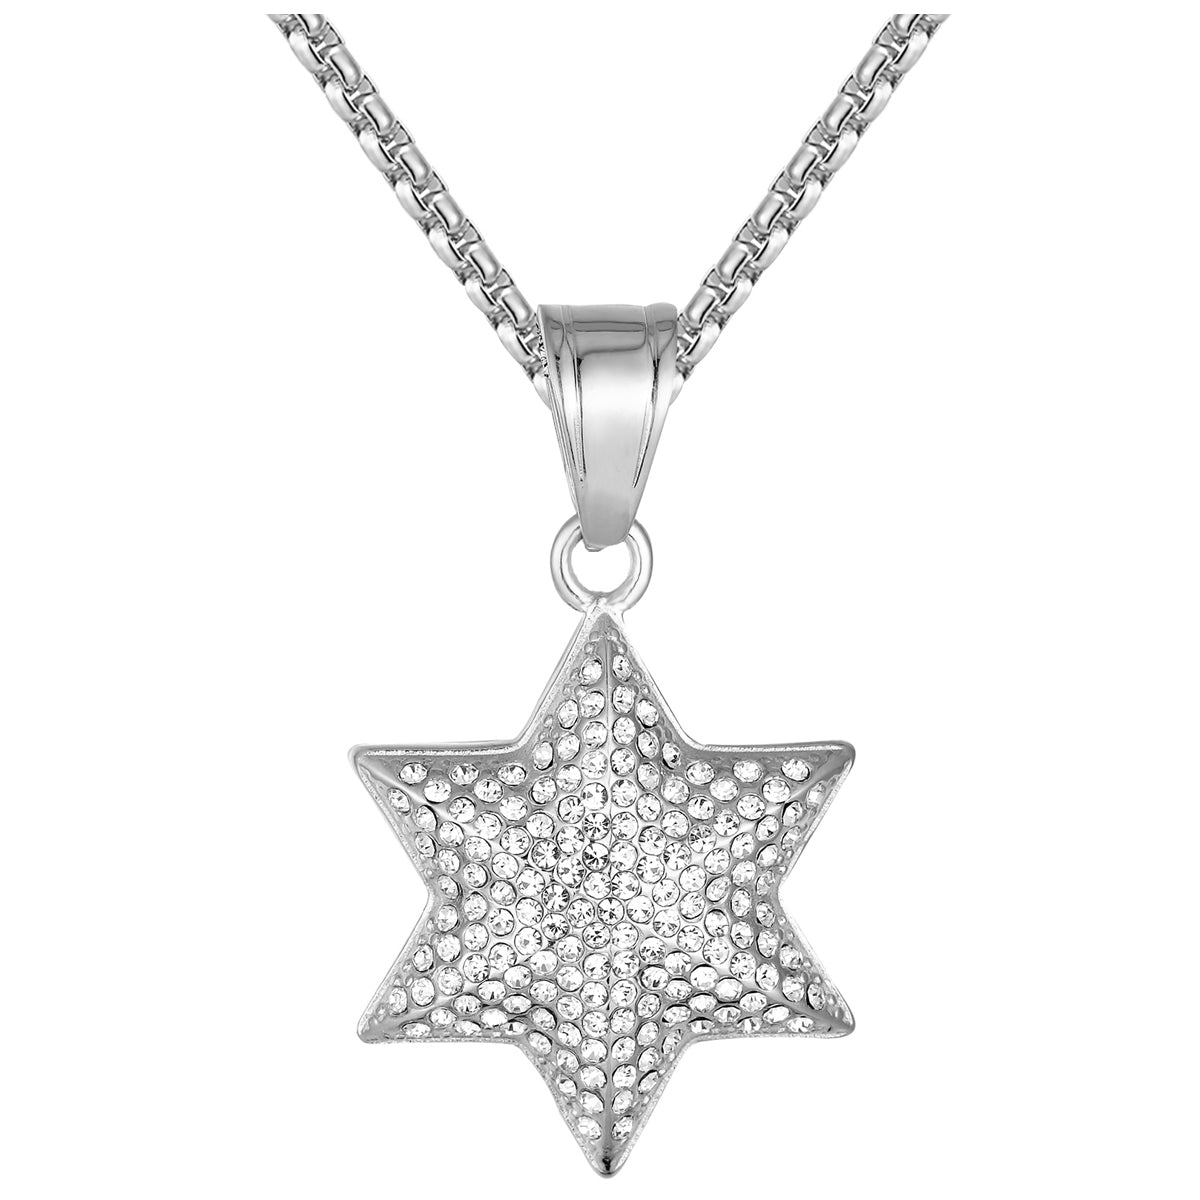 Stainless Steel Six Point Star 3D Apopo Bling Pendant 24" Chain